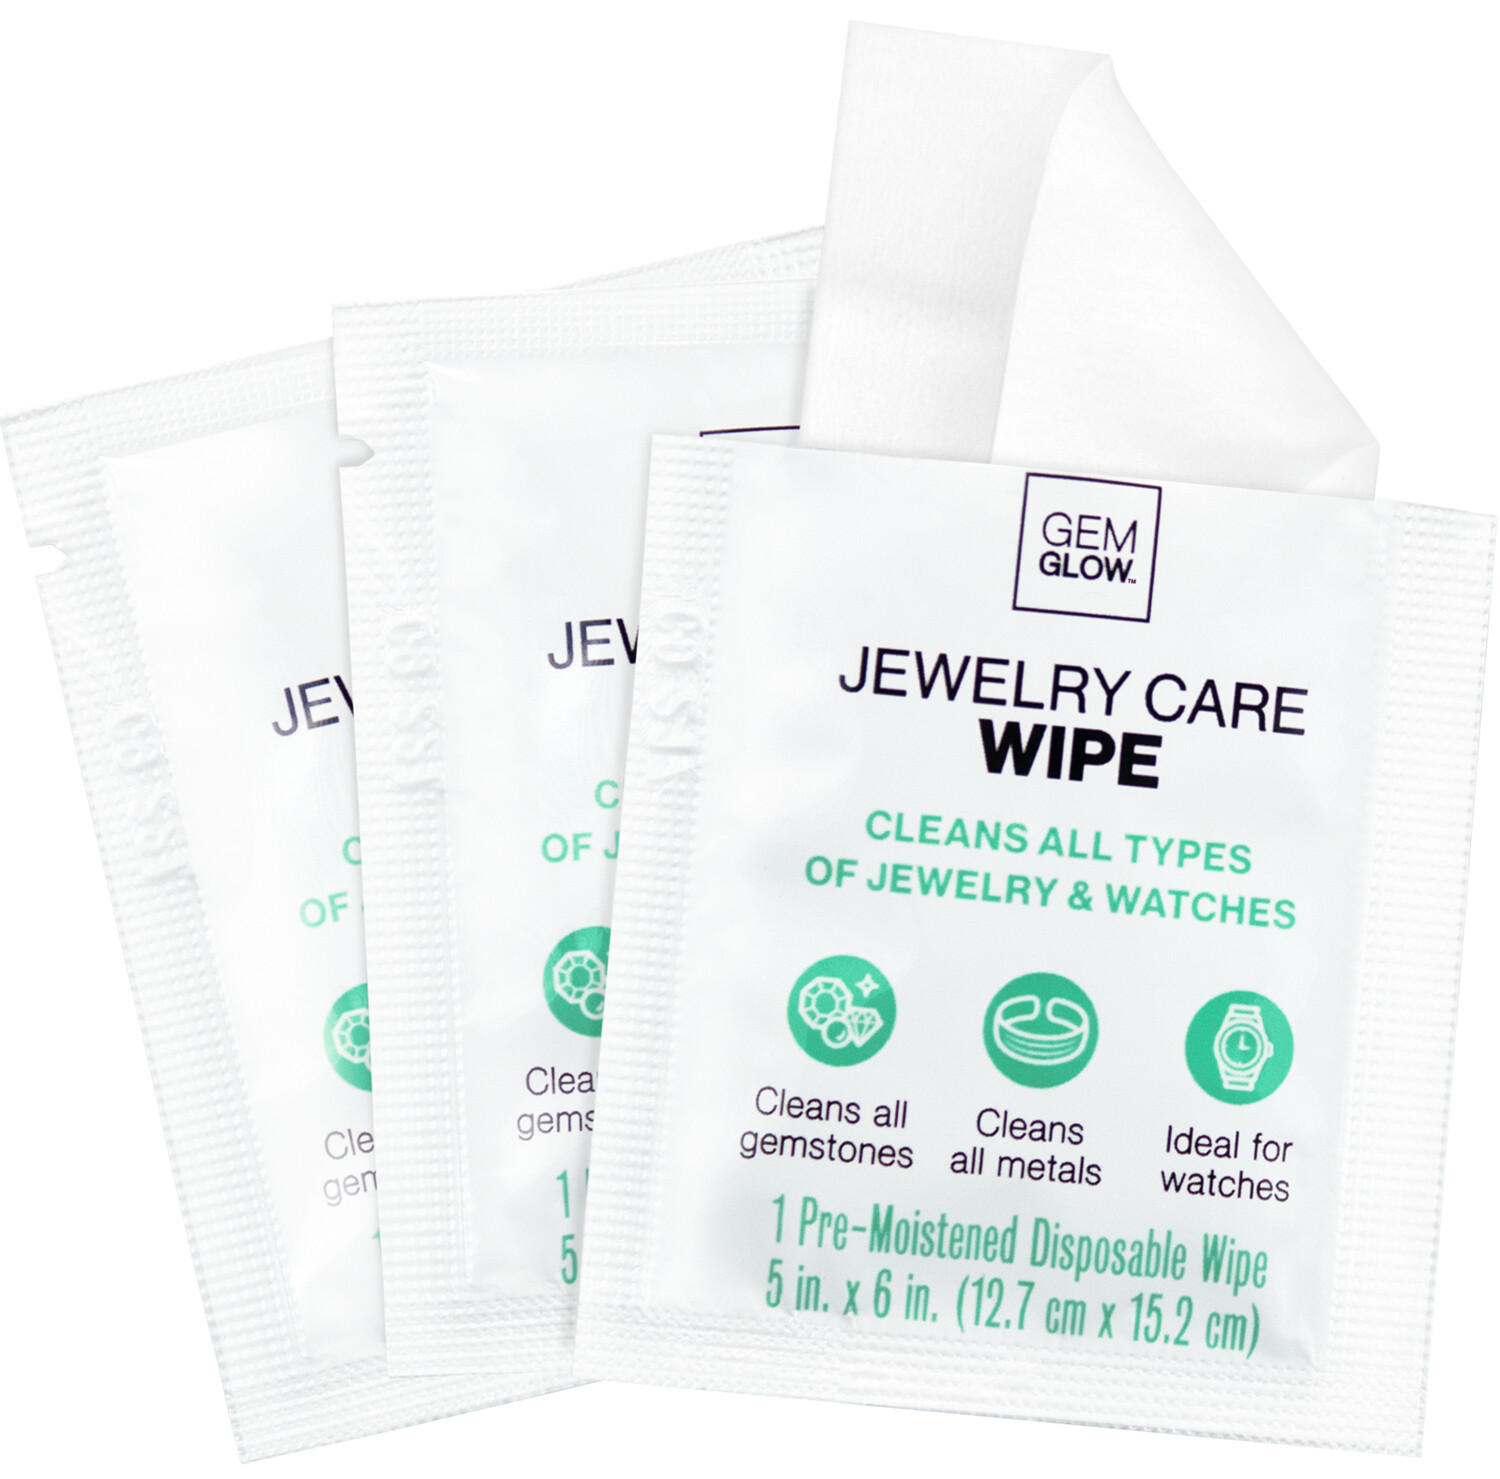 Individually Wrapped Jewellery Wipe Polish Gold Silver And Watches Cleaning  Wet Wipes Single Package - Buy Individually Wrapped Jewellery Wipe Polish  Gold Silver And Watches Cleaning Wet Wipes Single Package Product on